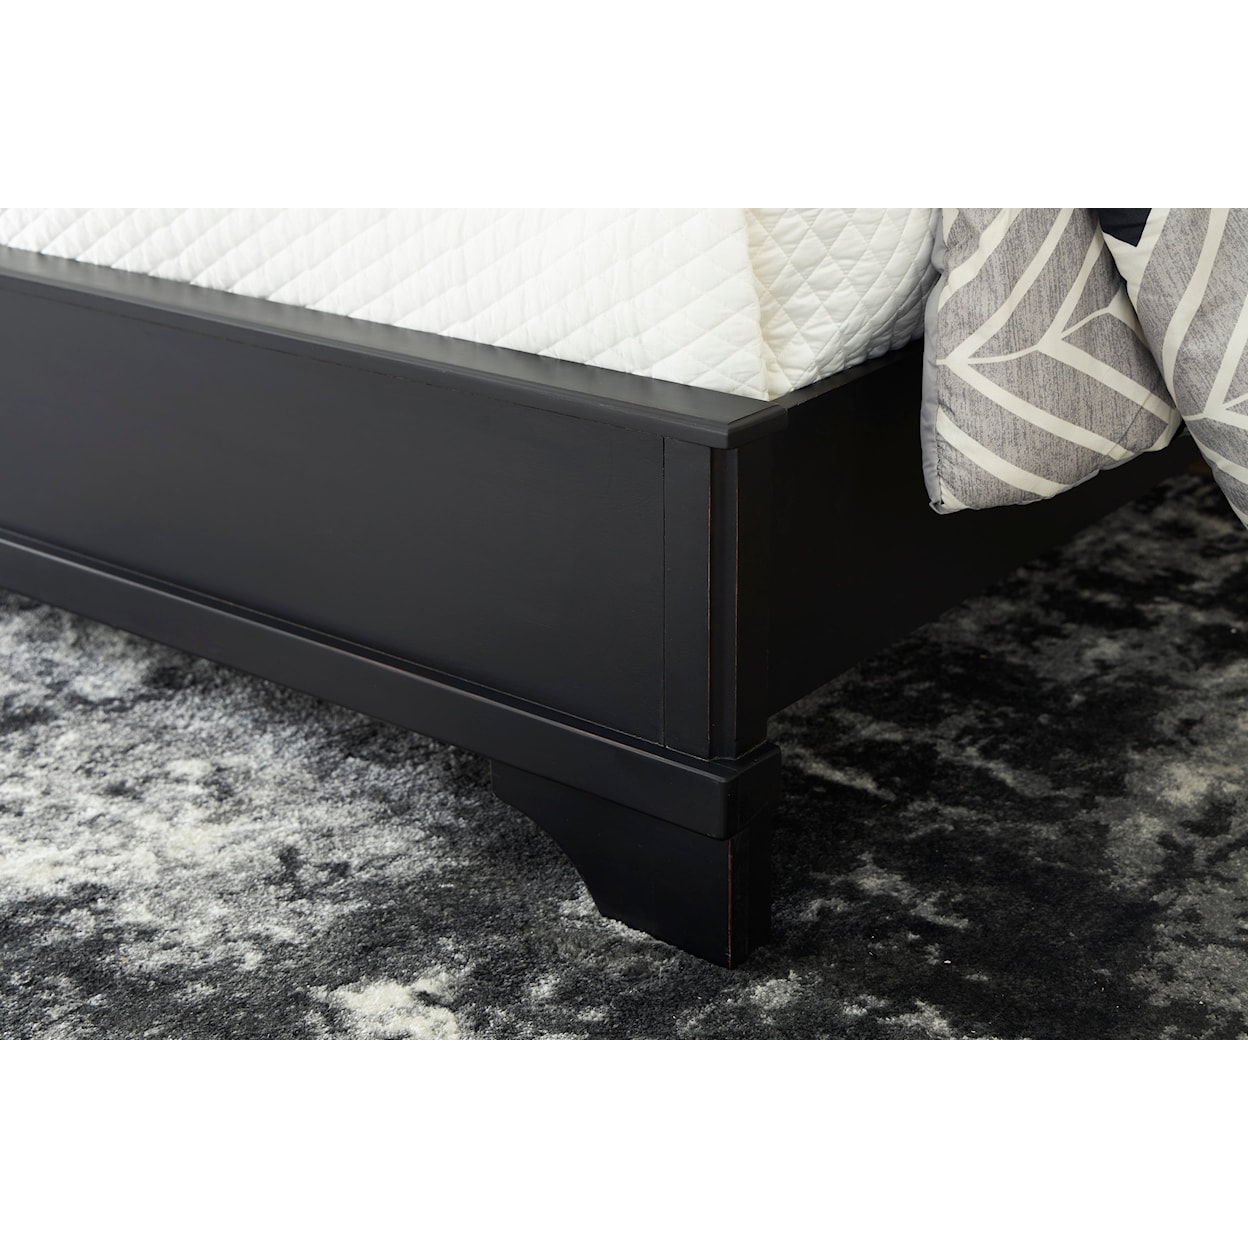 Signature Chylanta Queen Sleigh Bed